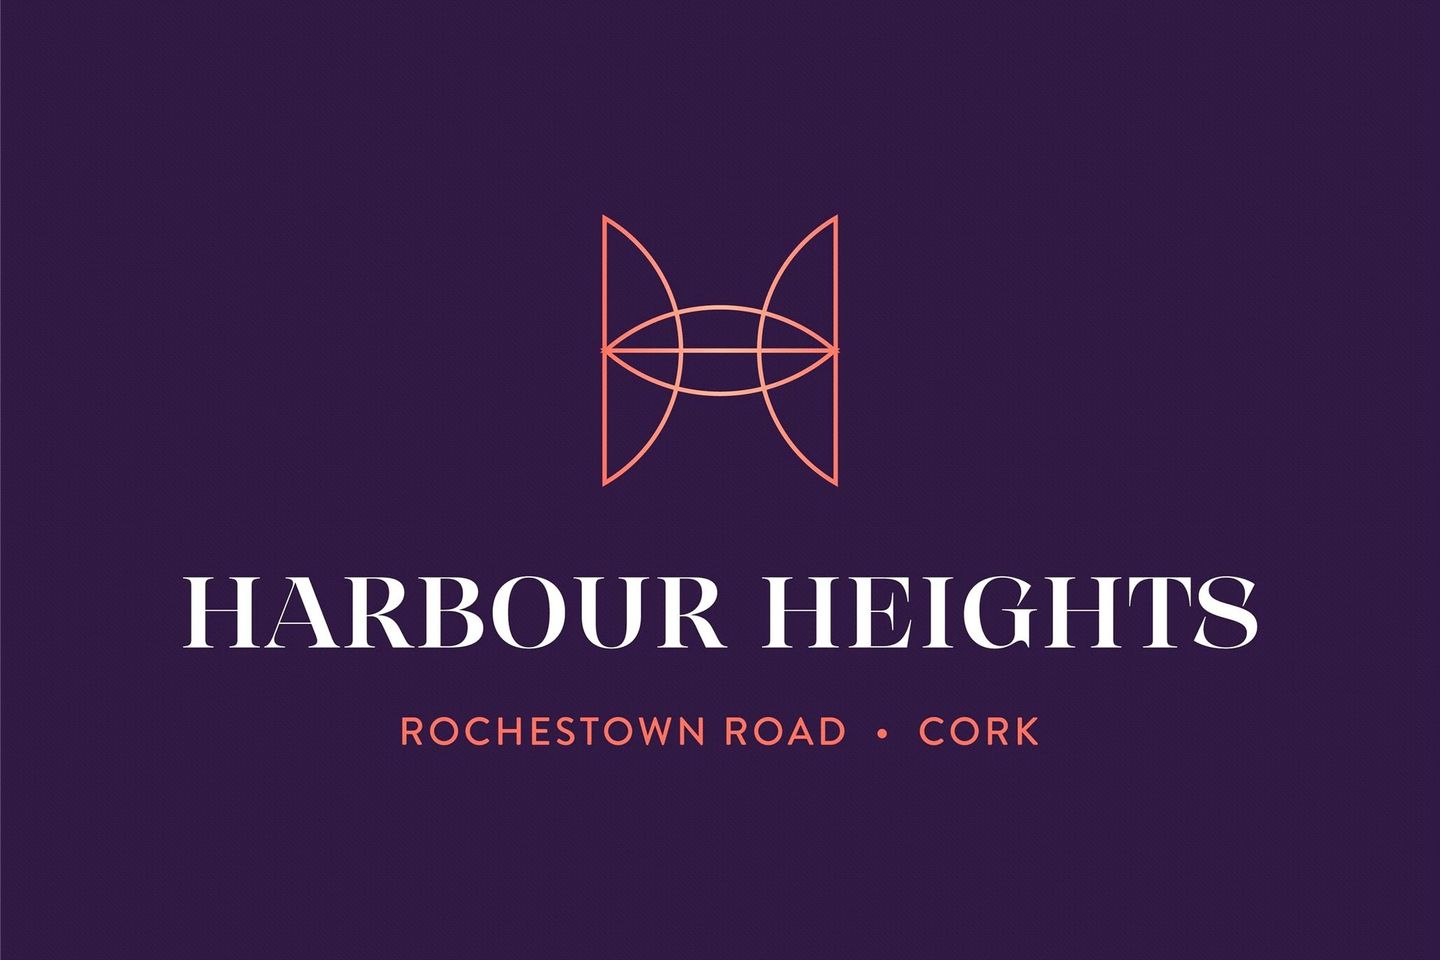 2 Bed Mid Terrace/Semi-Detached, Harbour Heights, 2 Bed Mid Terrace/Semi-Detached, Harbour Heights, Rochestown, Co. Cork